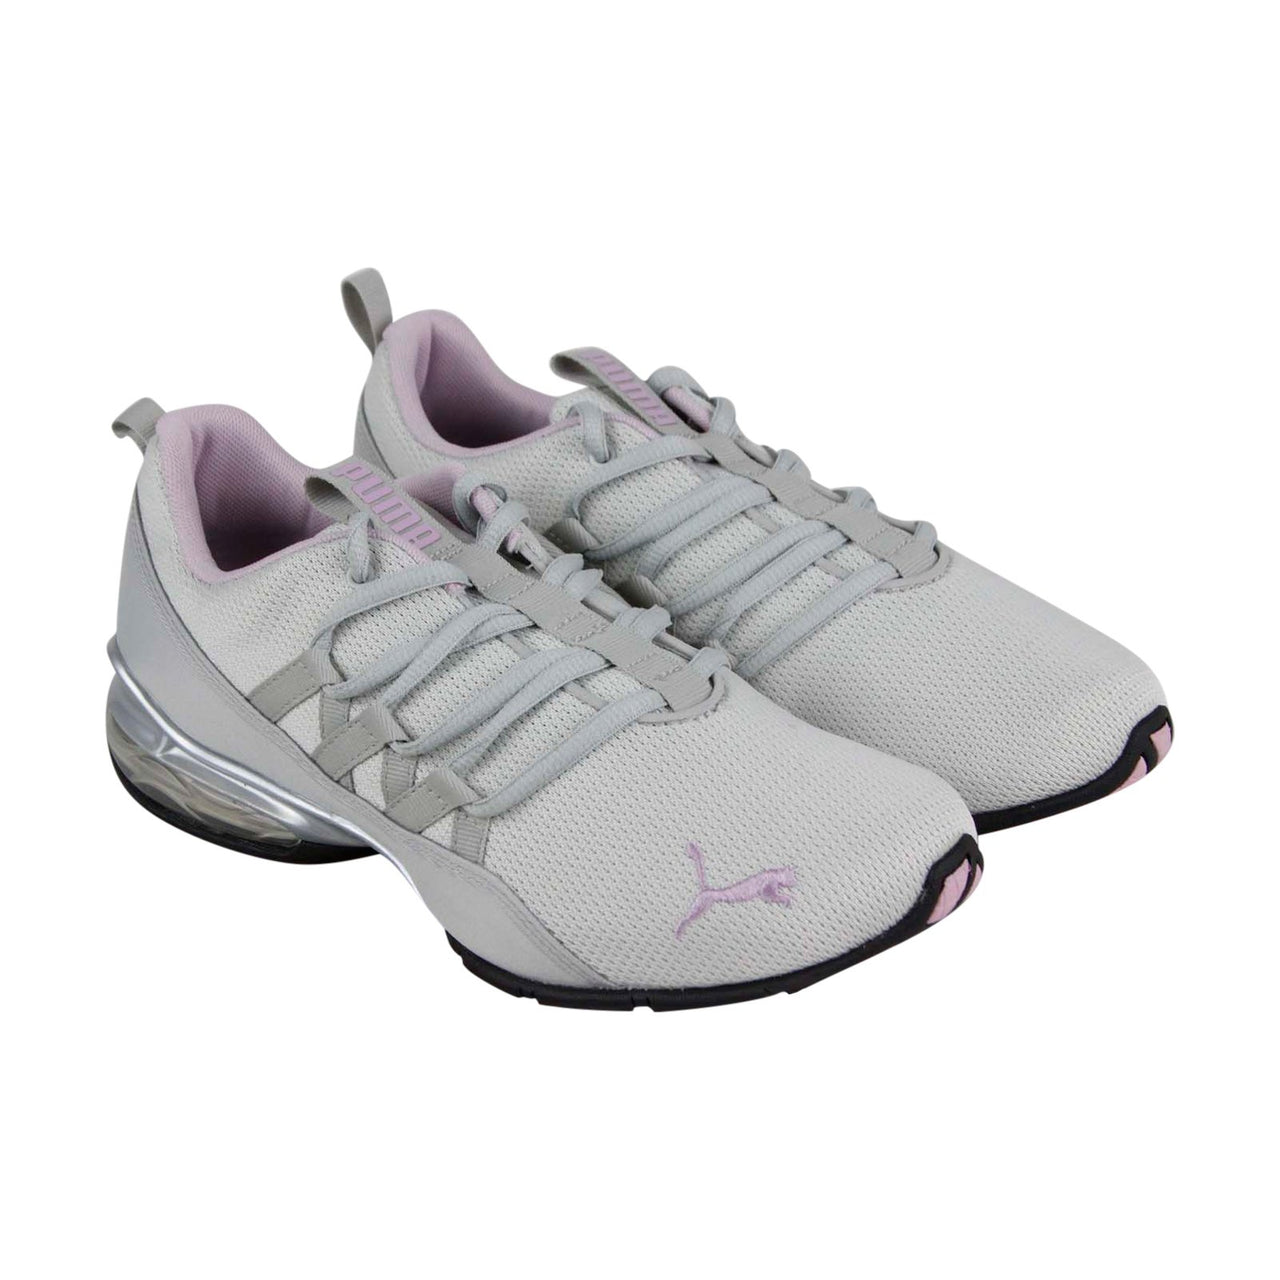 Puma Riaze Prowl 19030505 Womens Gray Canvas Low Top Athletic Running ...